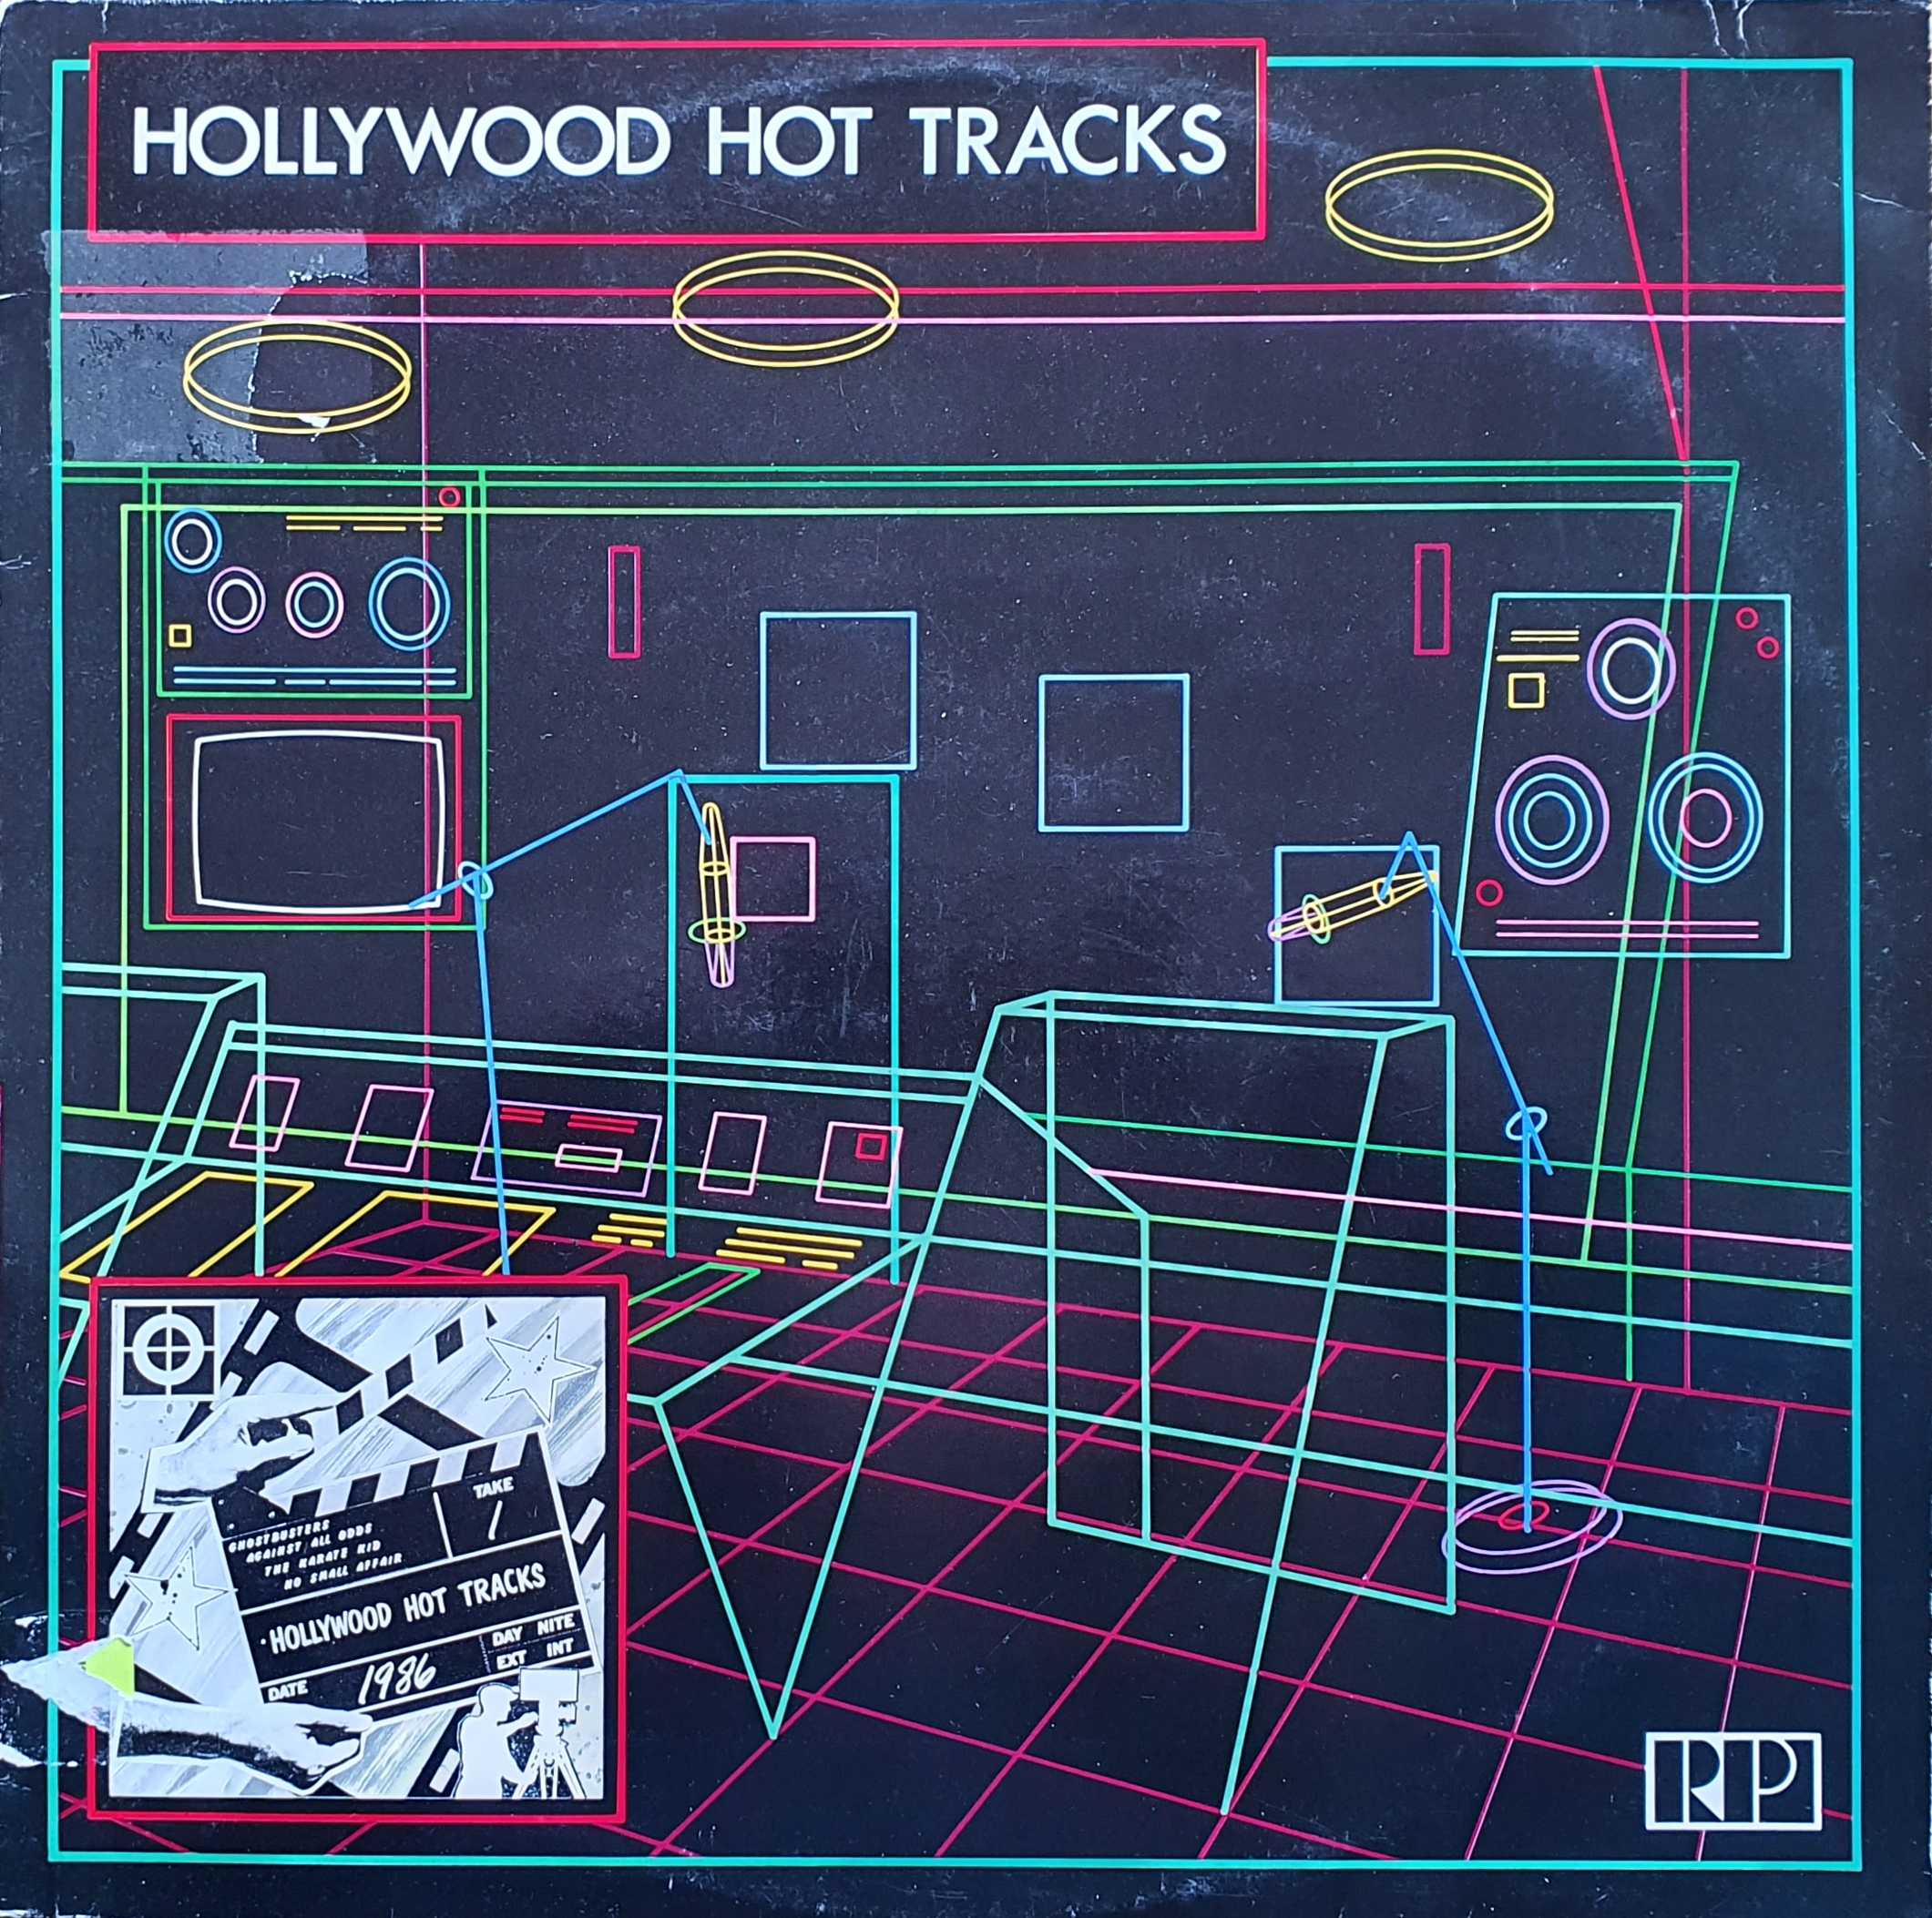 Picture of TAIR 86029 Hollywood hot tracks by artist Various from the BBC albums - Records and Tapes library